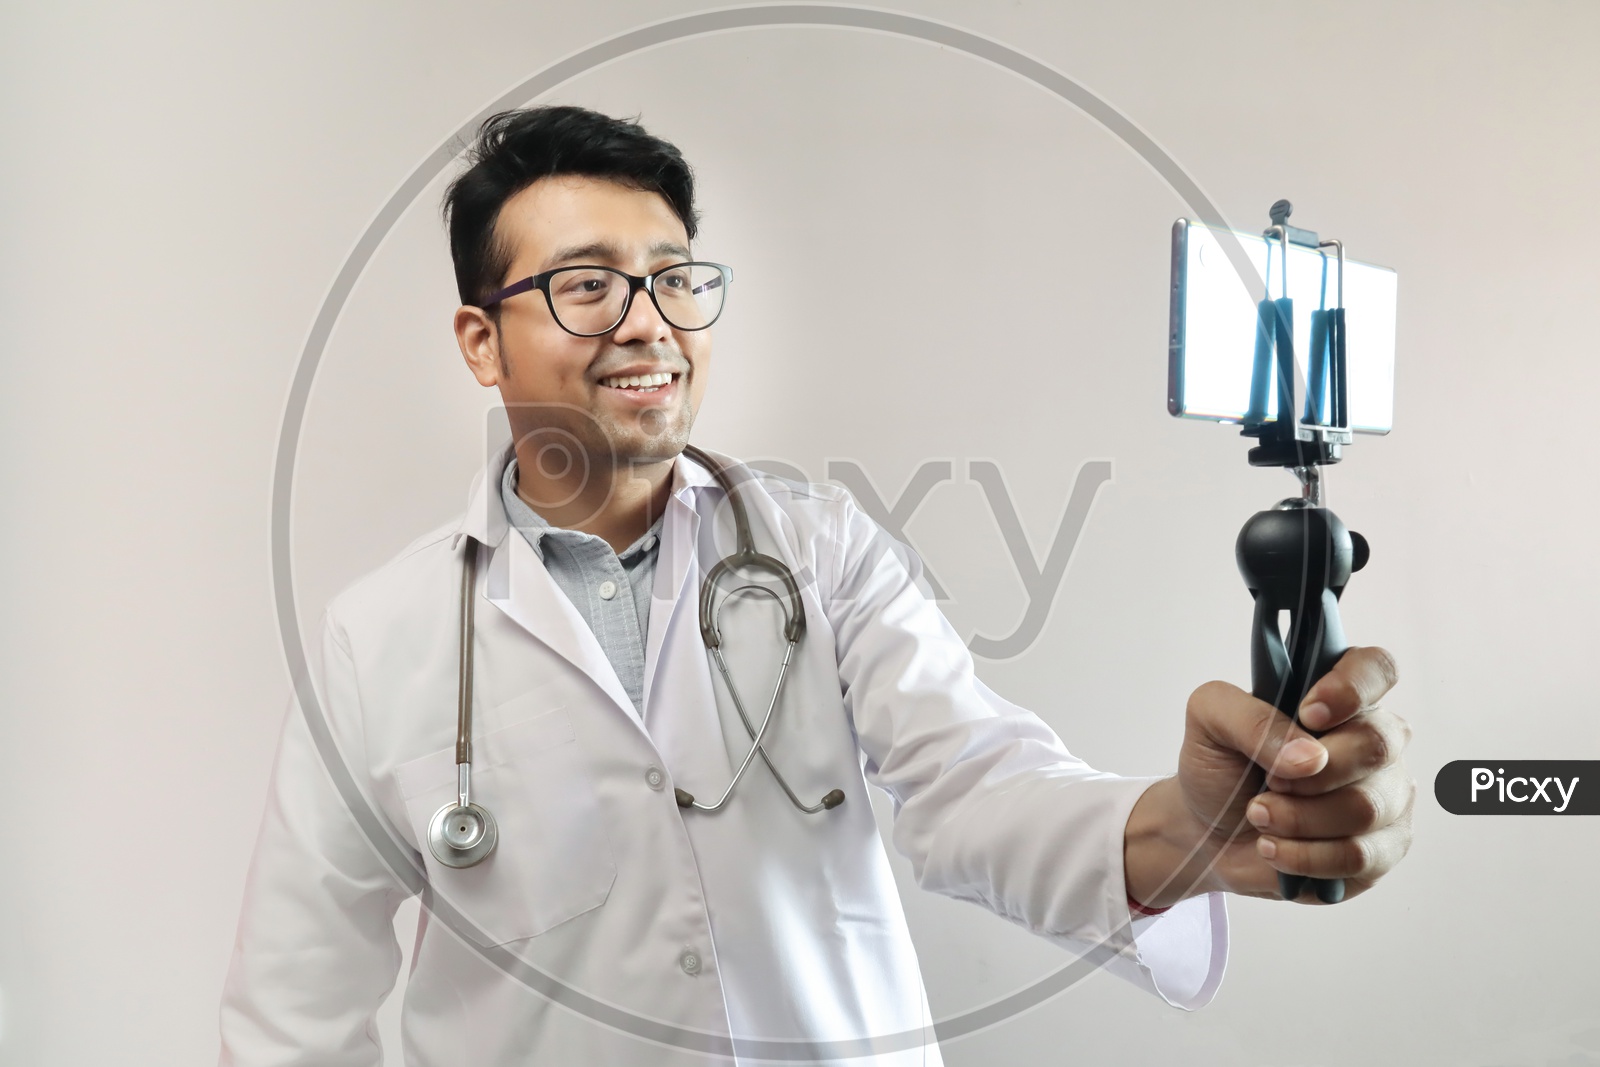 Male Indian Doctor In White Coat And Stethoscope Clicking Selfie With A Mobile Tripod And Futuristic Concept Cameraphone